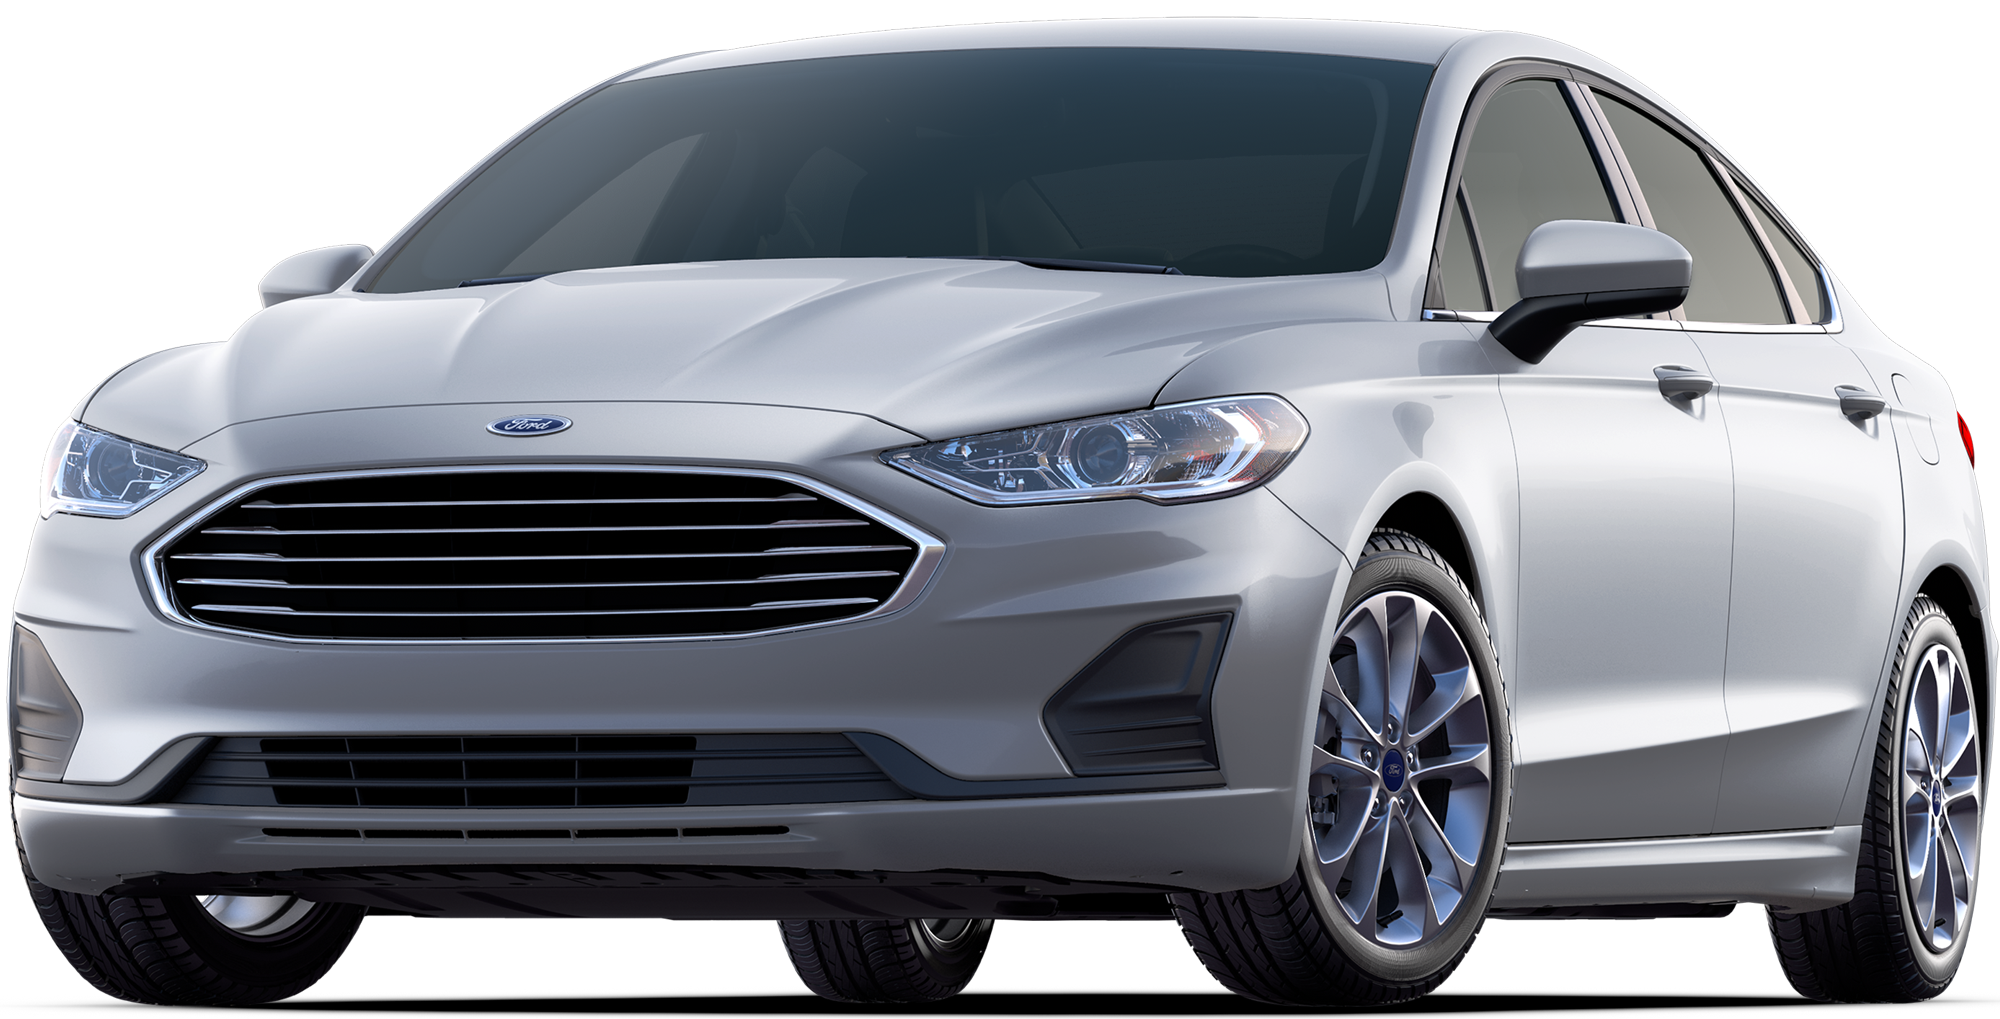 2020 Ford Fusion Hybrid Incentives, Specials & Offers in Duarte CA